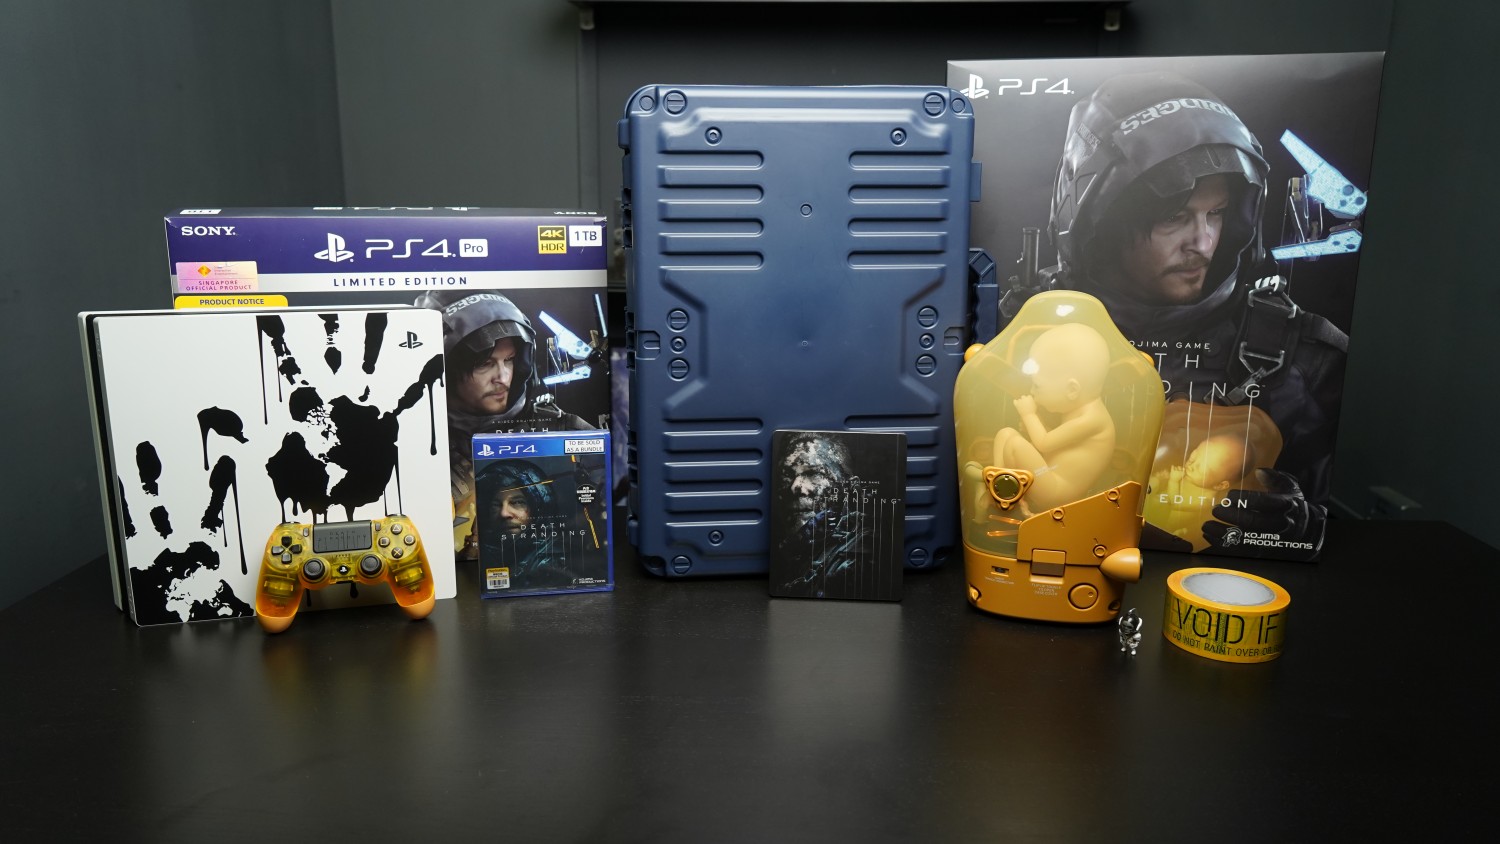 PS4 Pro DEATH STRANDING Console Unboxing - PlayStation 4 Limited